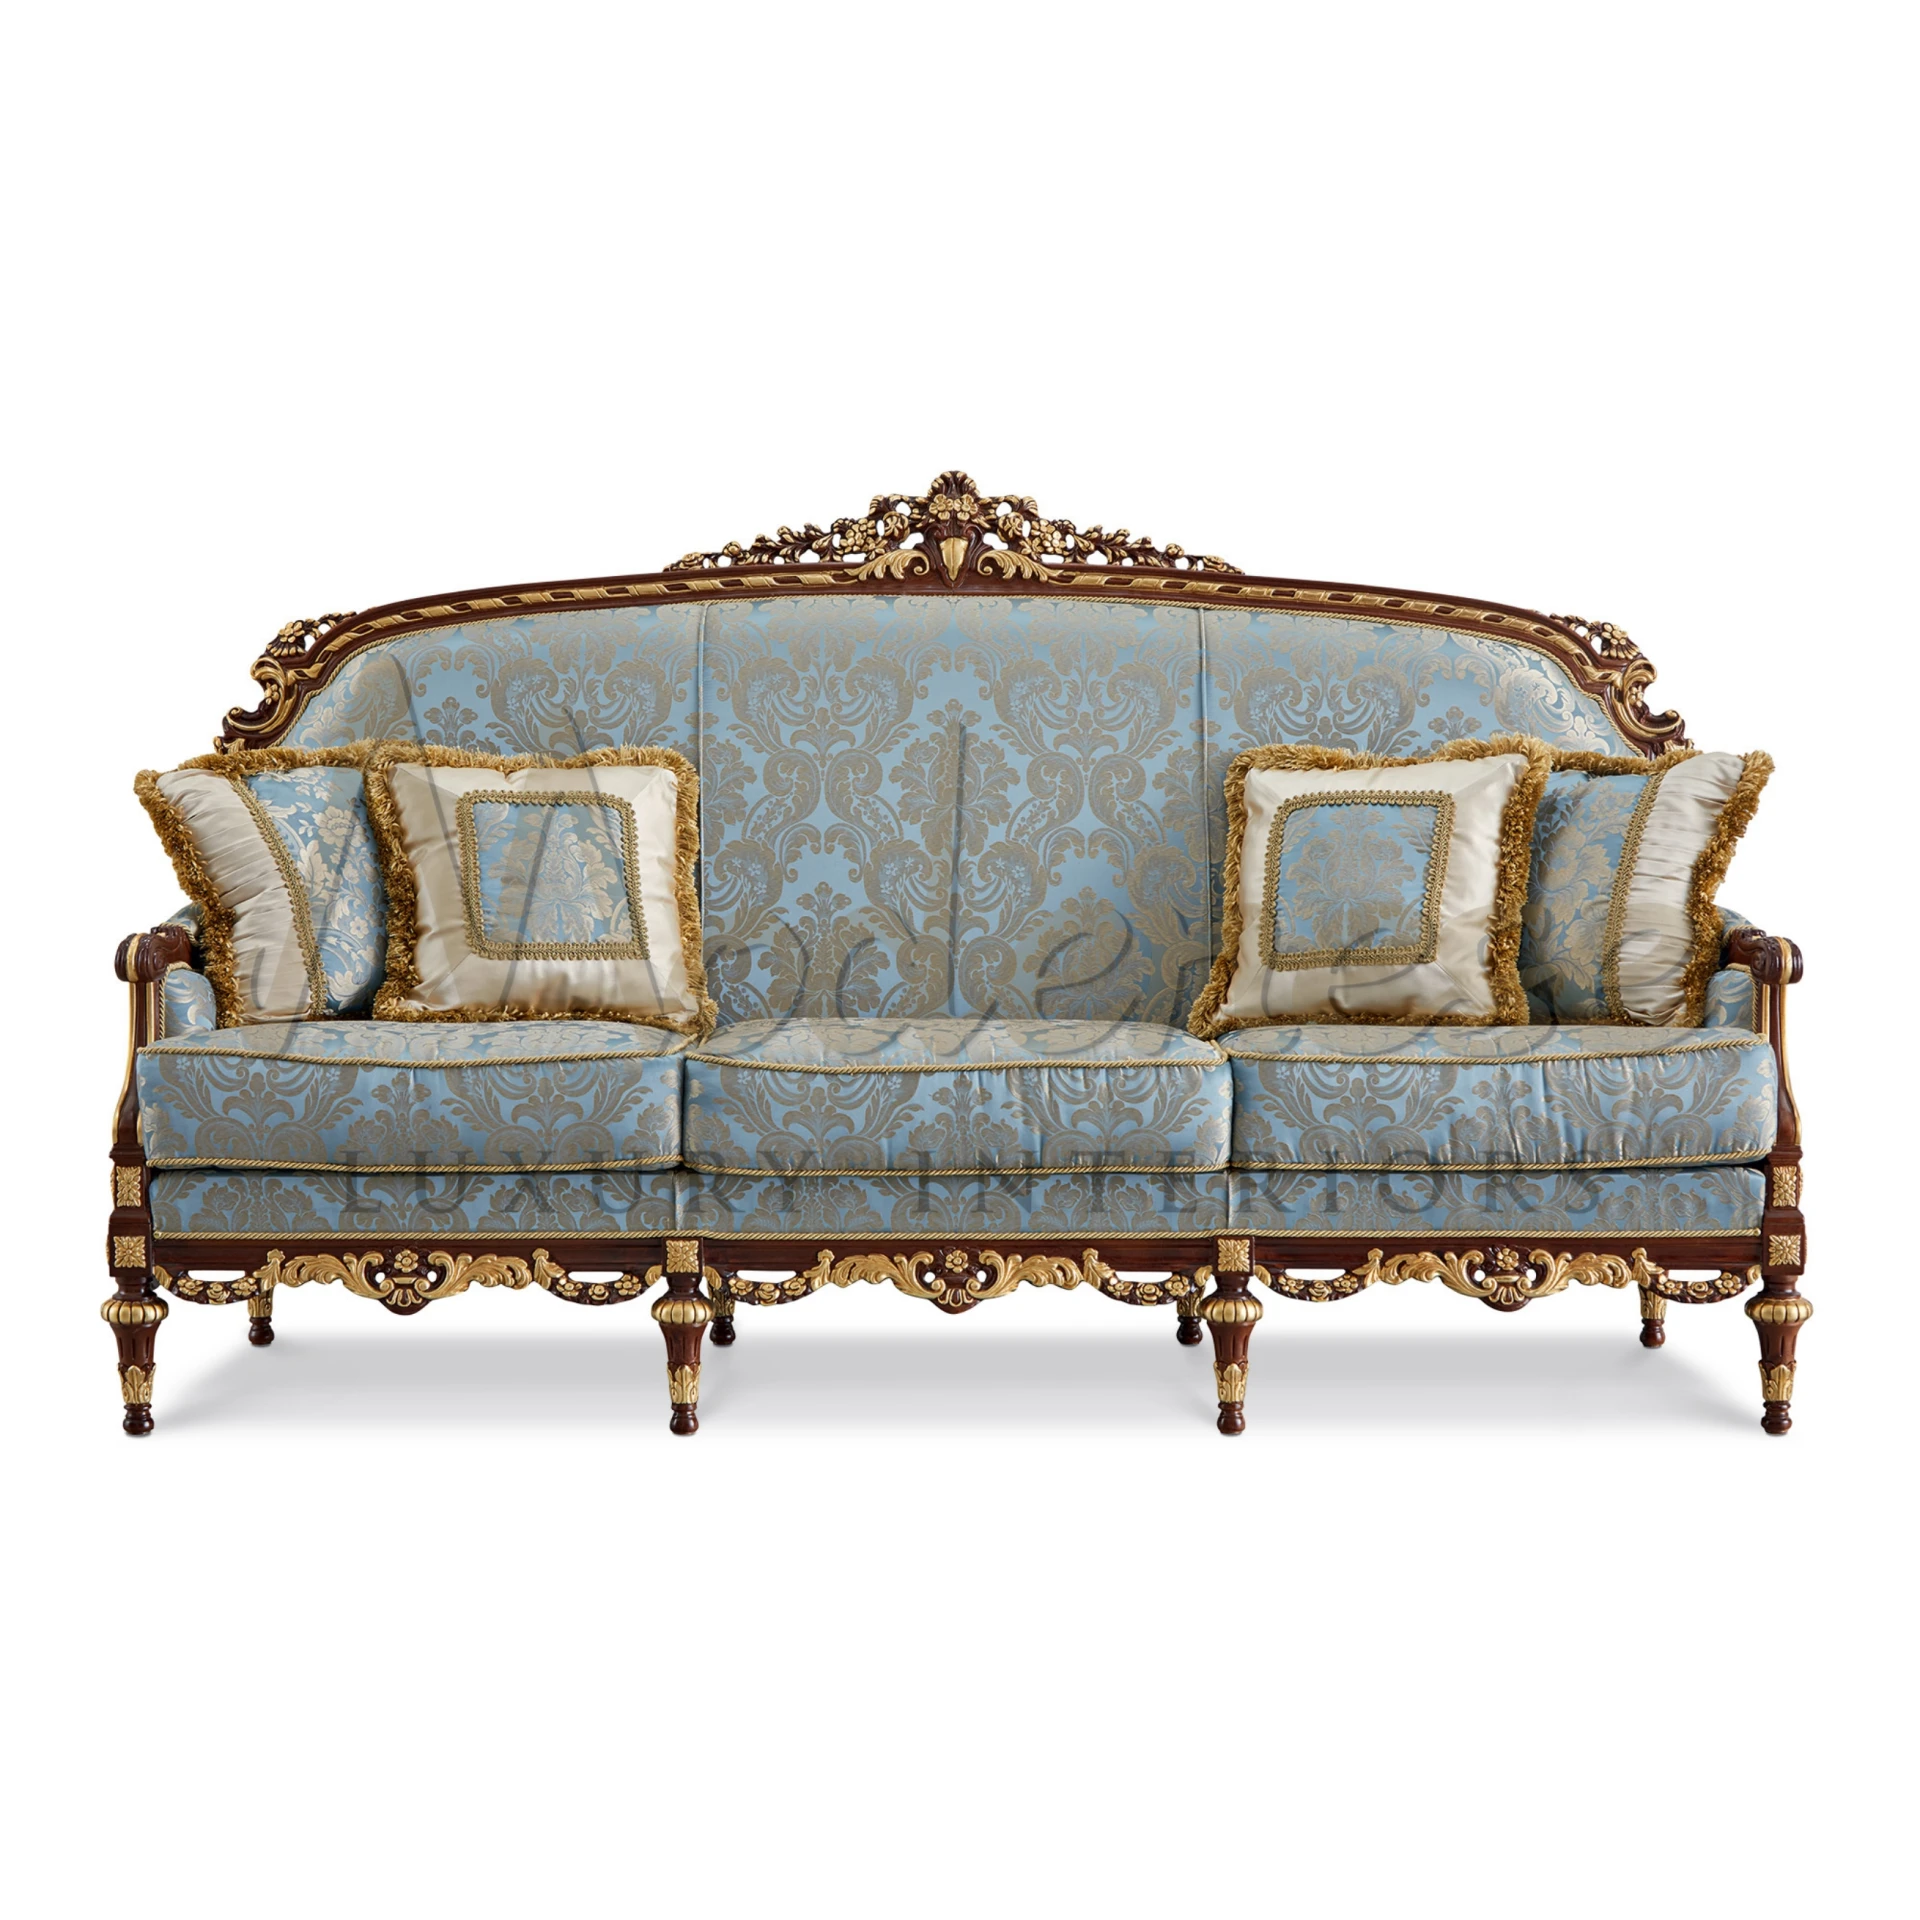 Opulent Imperial Sofa with hand-carved, gilded details and silk-blend fabric, embodying traditional artisanal craftsmanship.